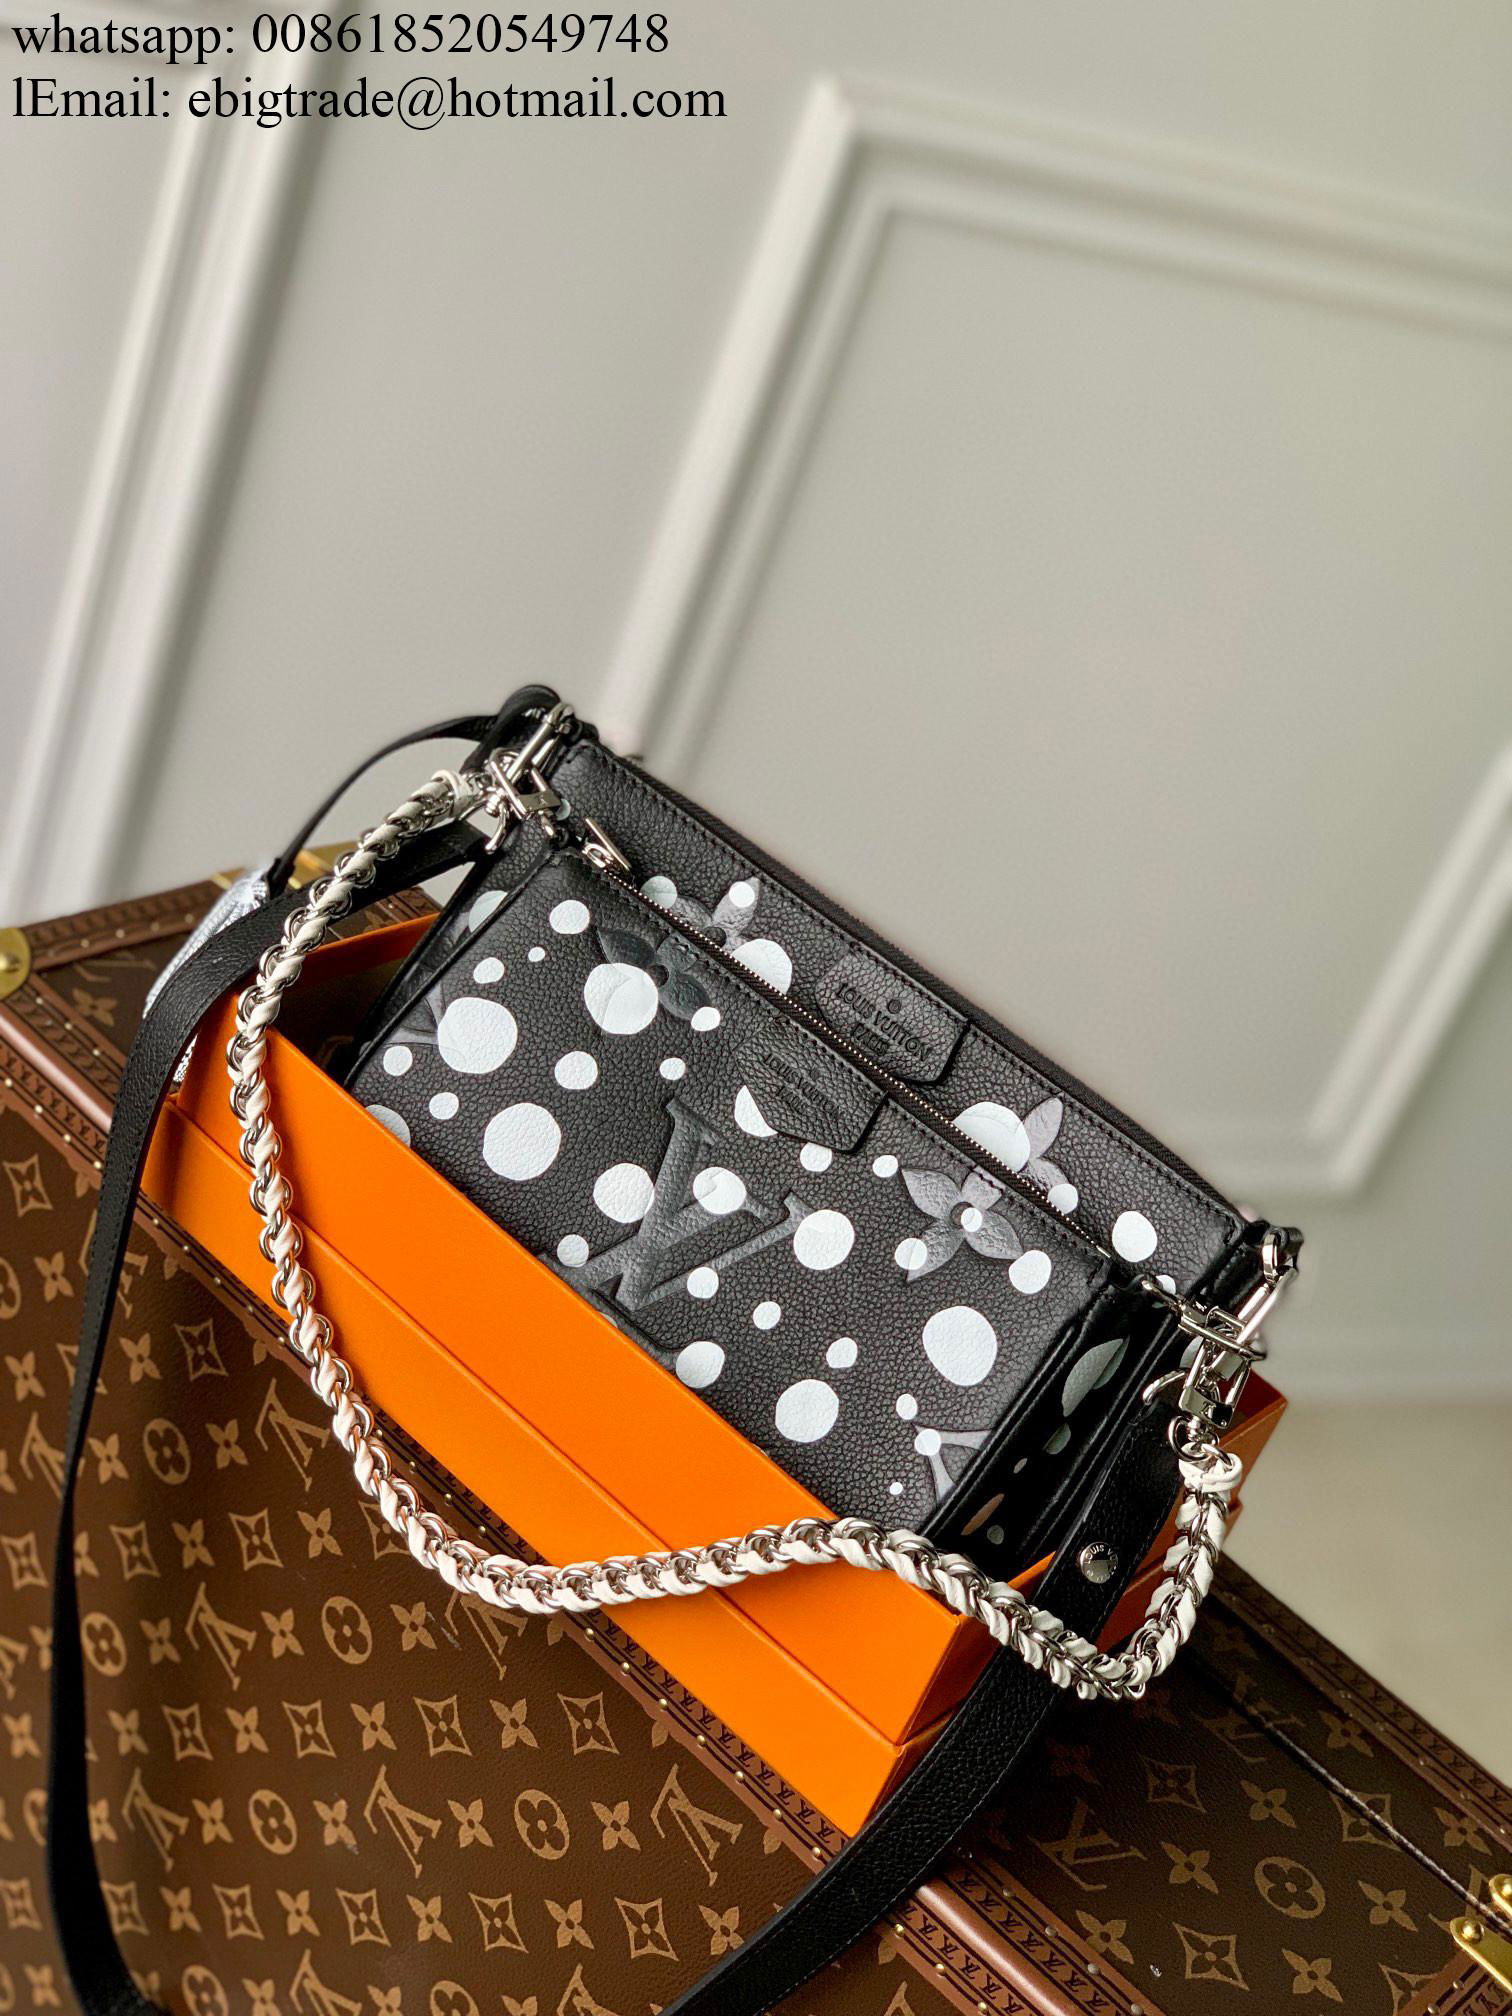               handbags     ags on sale ALMA bags     EVERFULL MM     AUPHINE MM  3